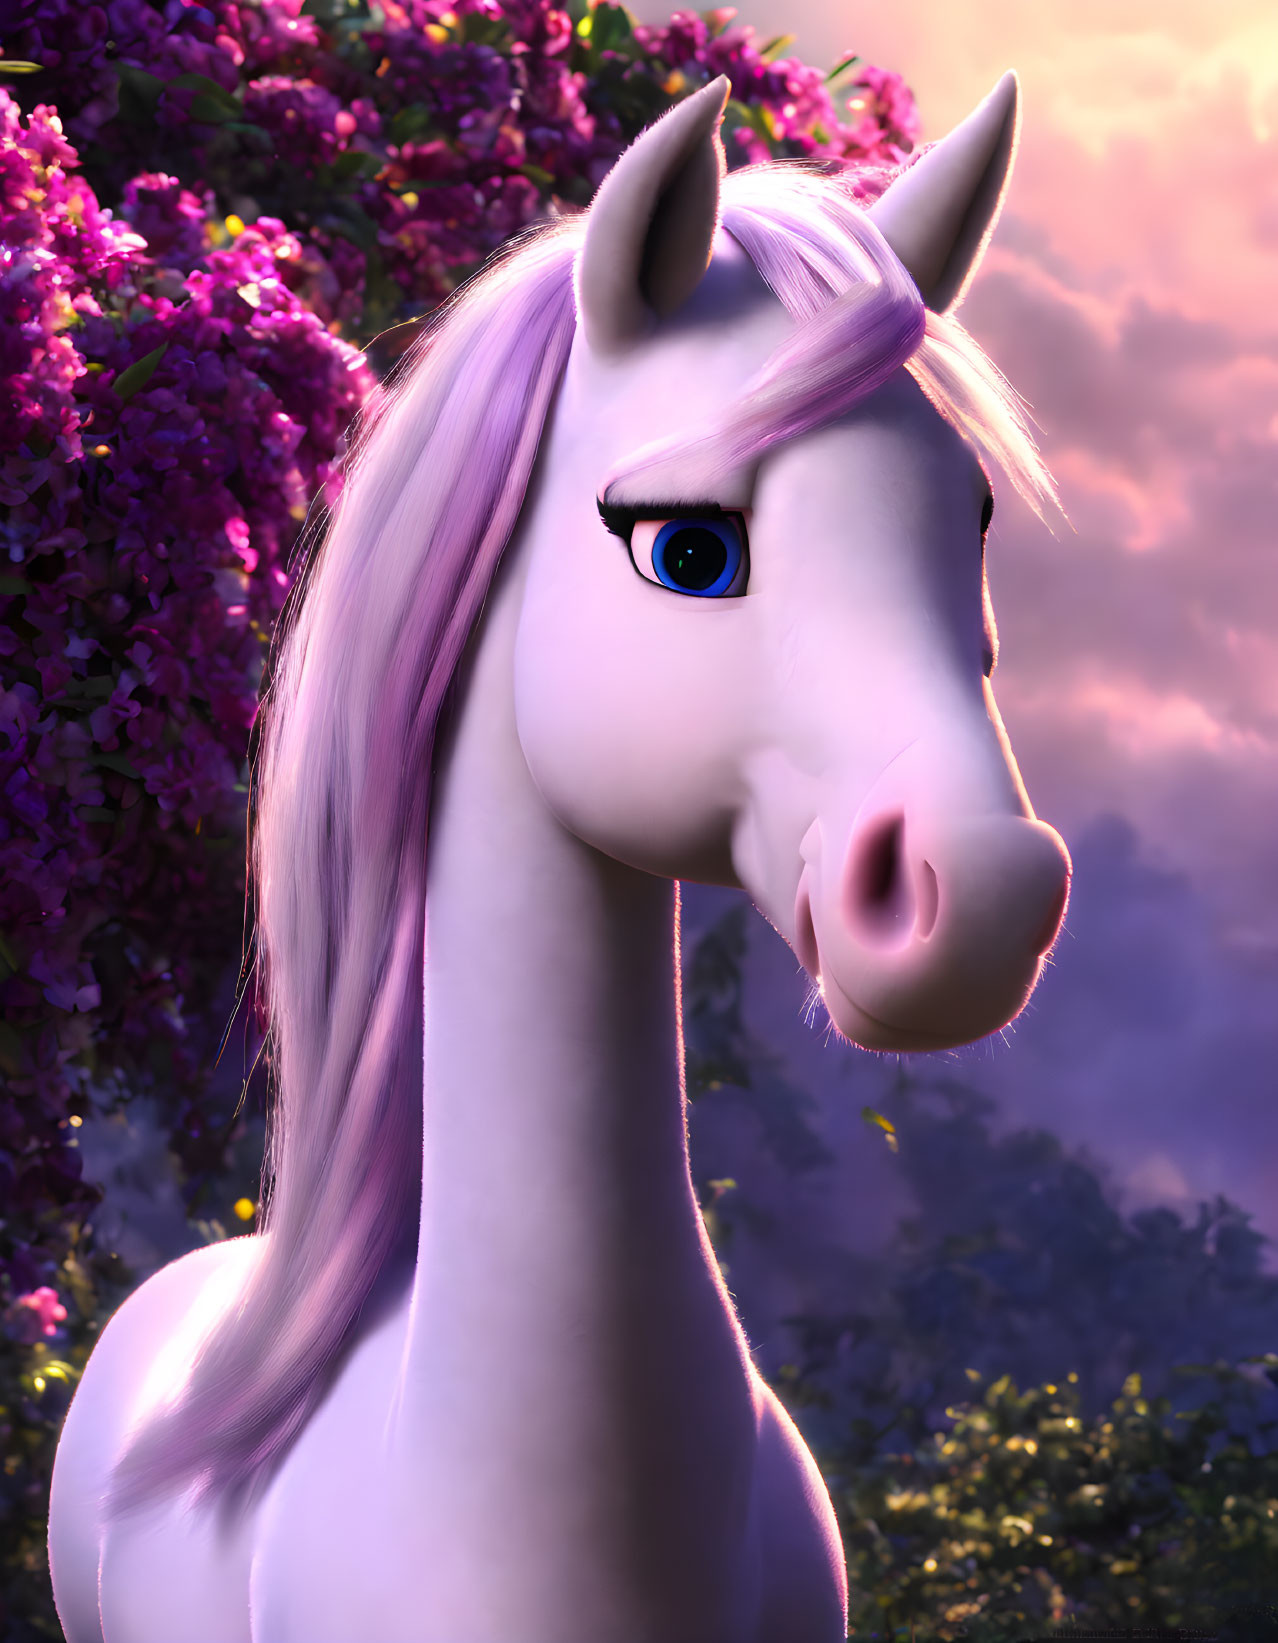 Purple-Maned Animated Horse with Horn in Vibrant Floral Setting